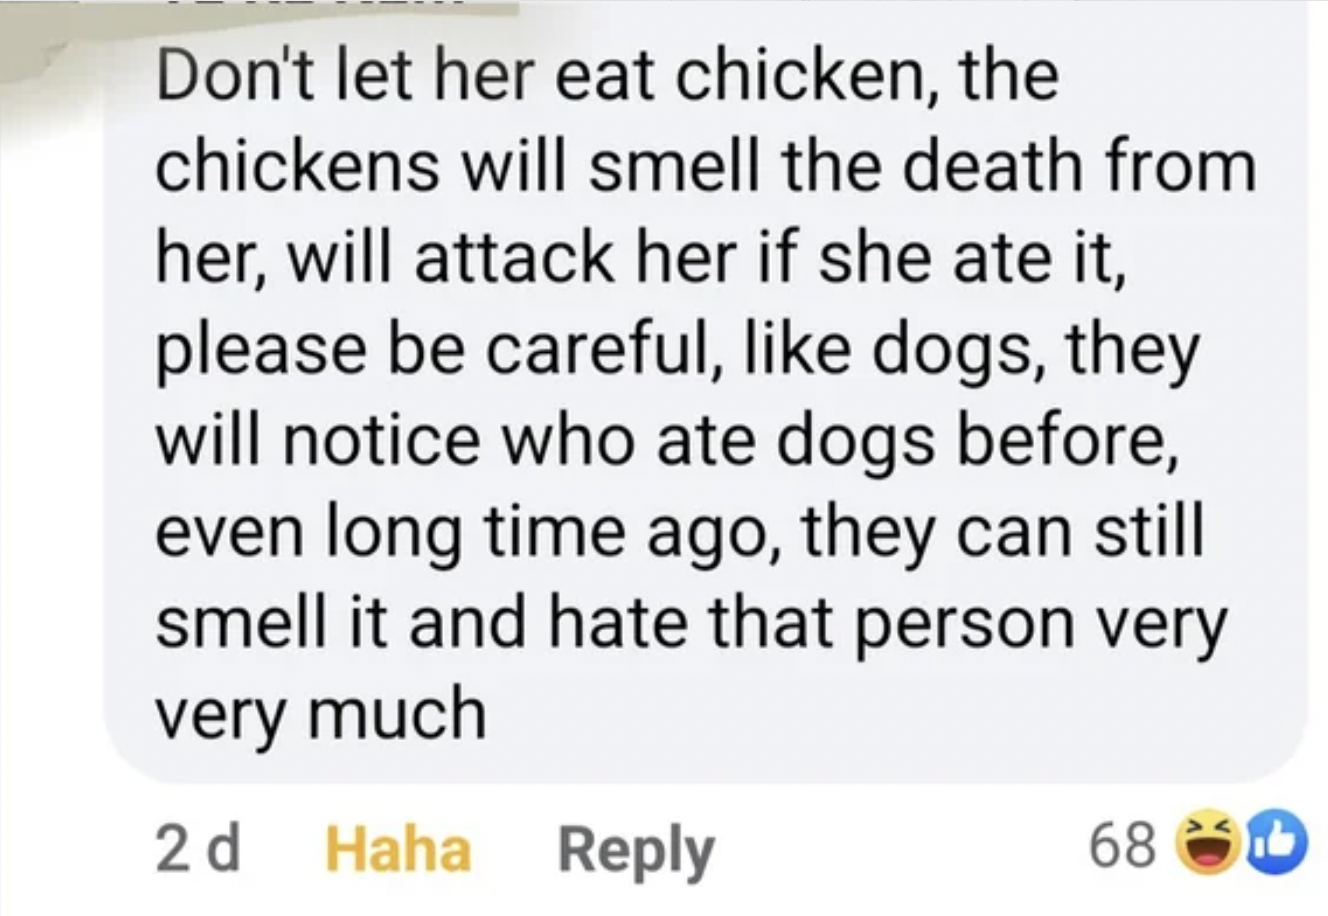 Insane People of Facebook - paper - Don't let her eat chicken, the chickens will smell the death from her, will attack her if she ate it, please be careful, dogs, they will notice who ate dogs before, even long time ago, they can still smell it and hate t